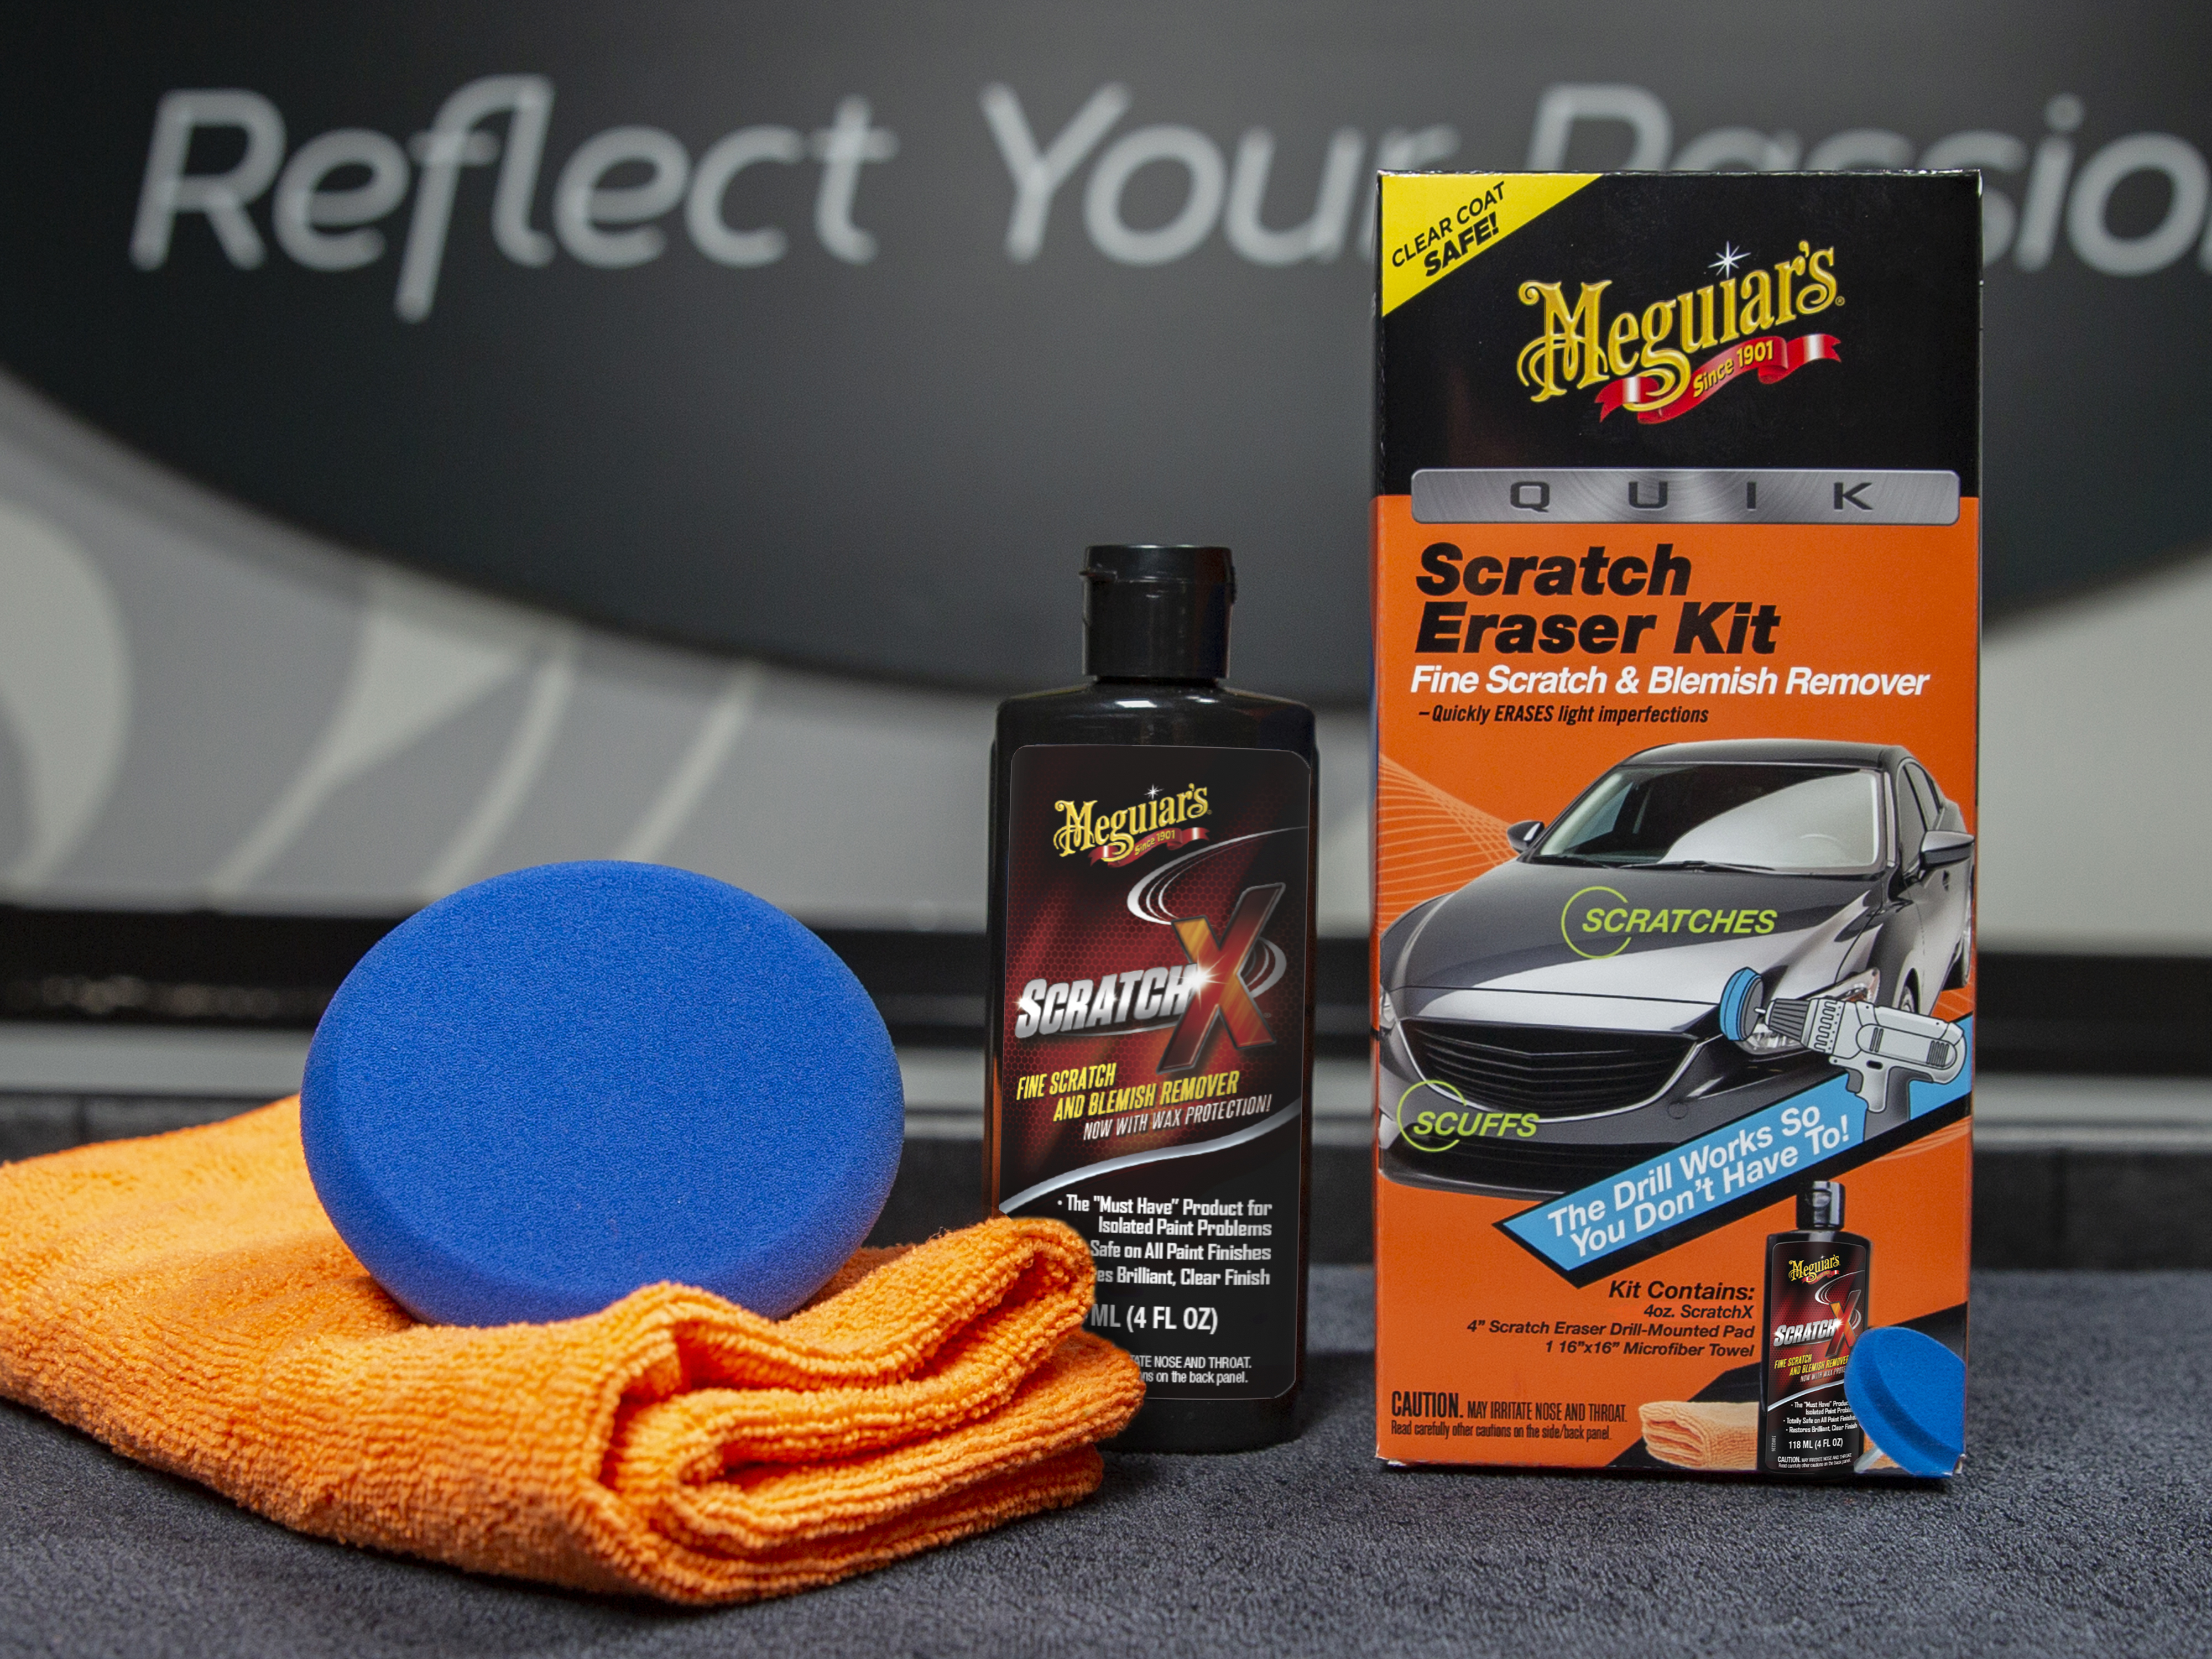 Meguiar's Quik Scratch Eraser Kit – All in One Kit to Remove Fine